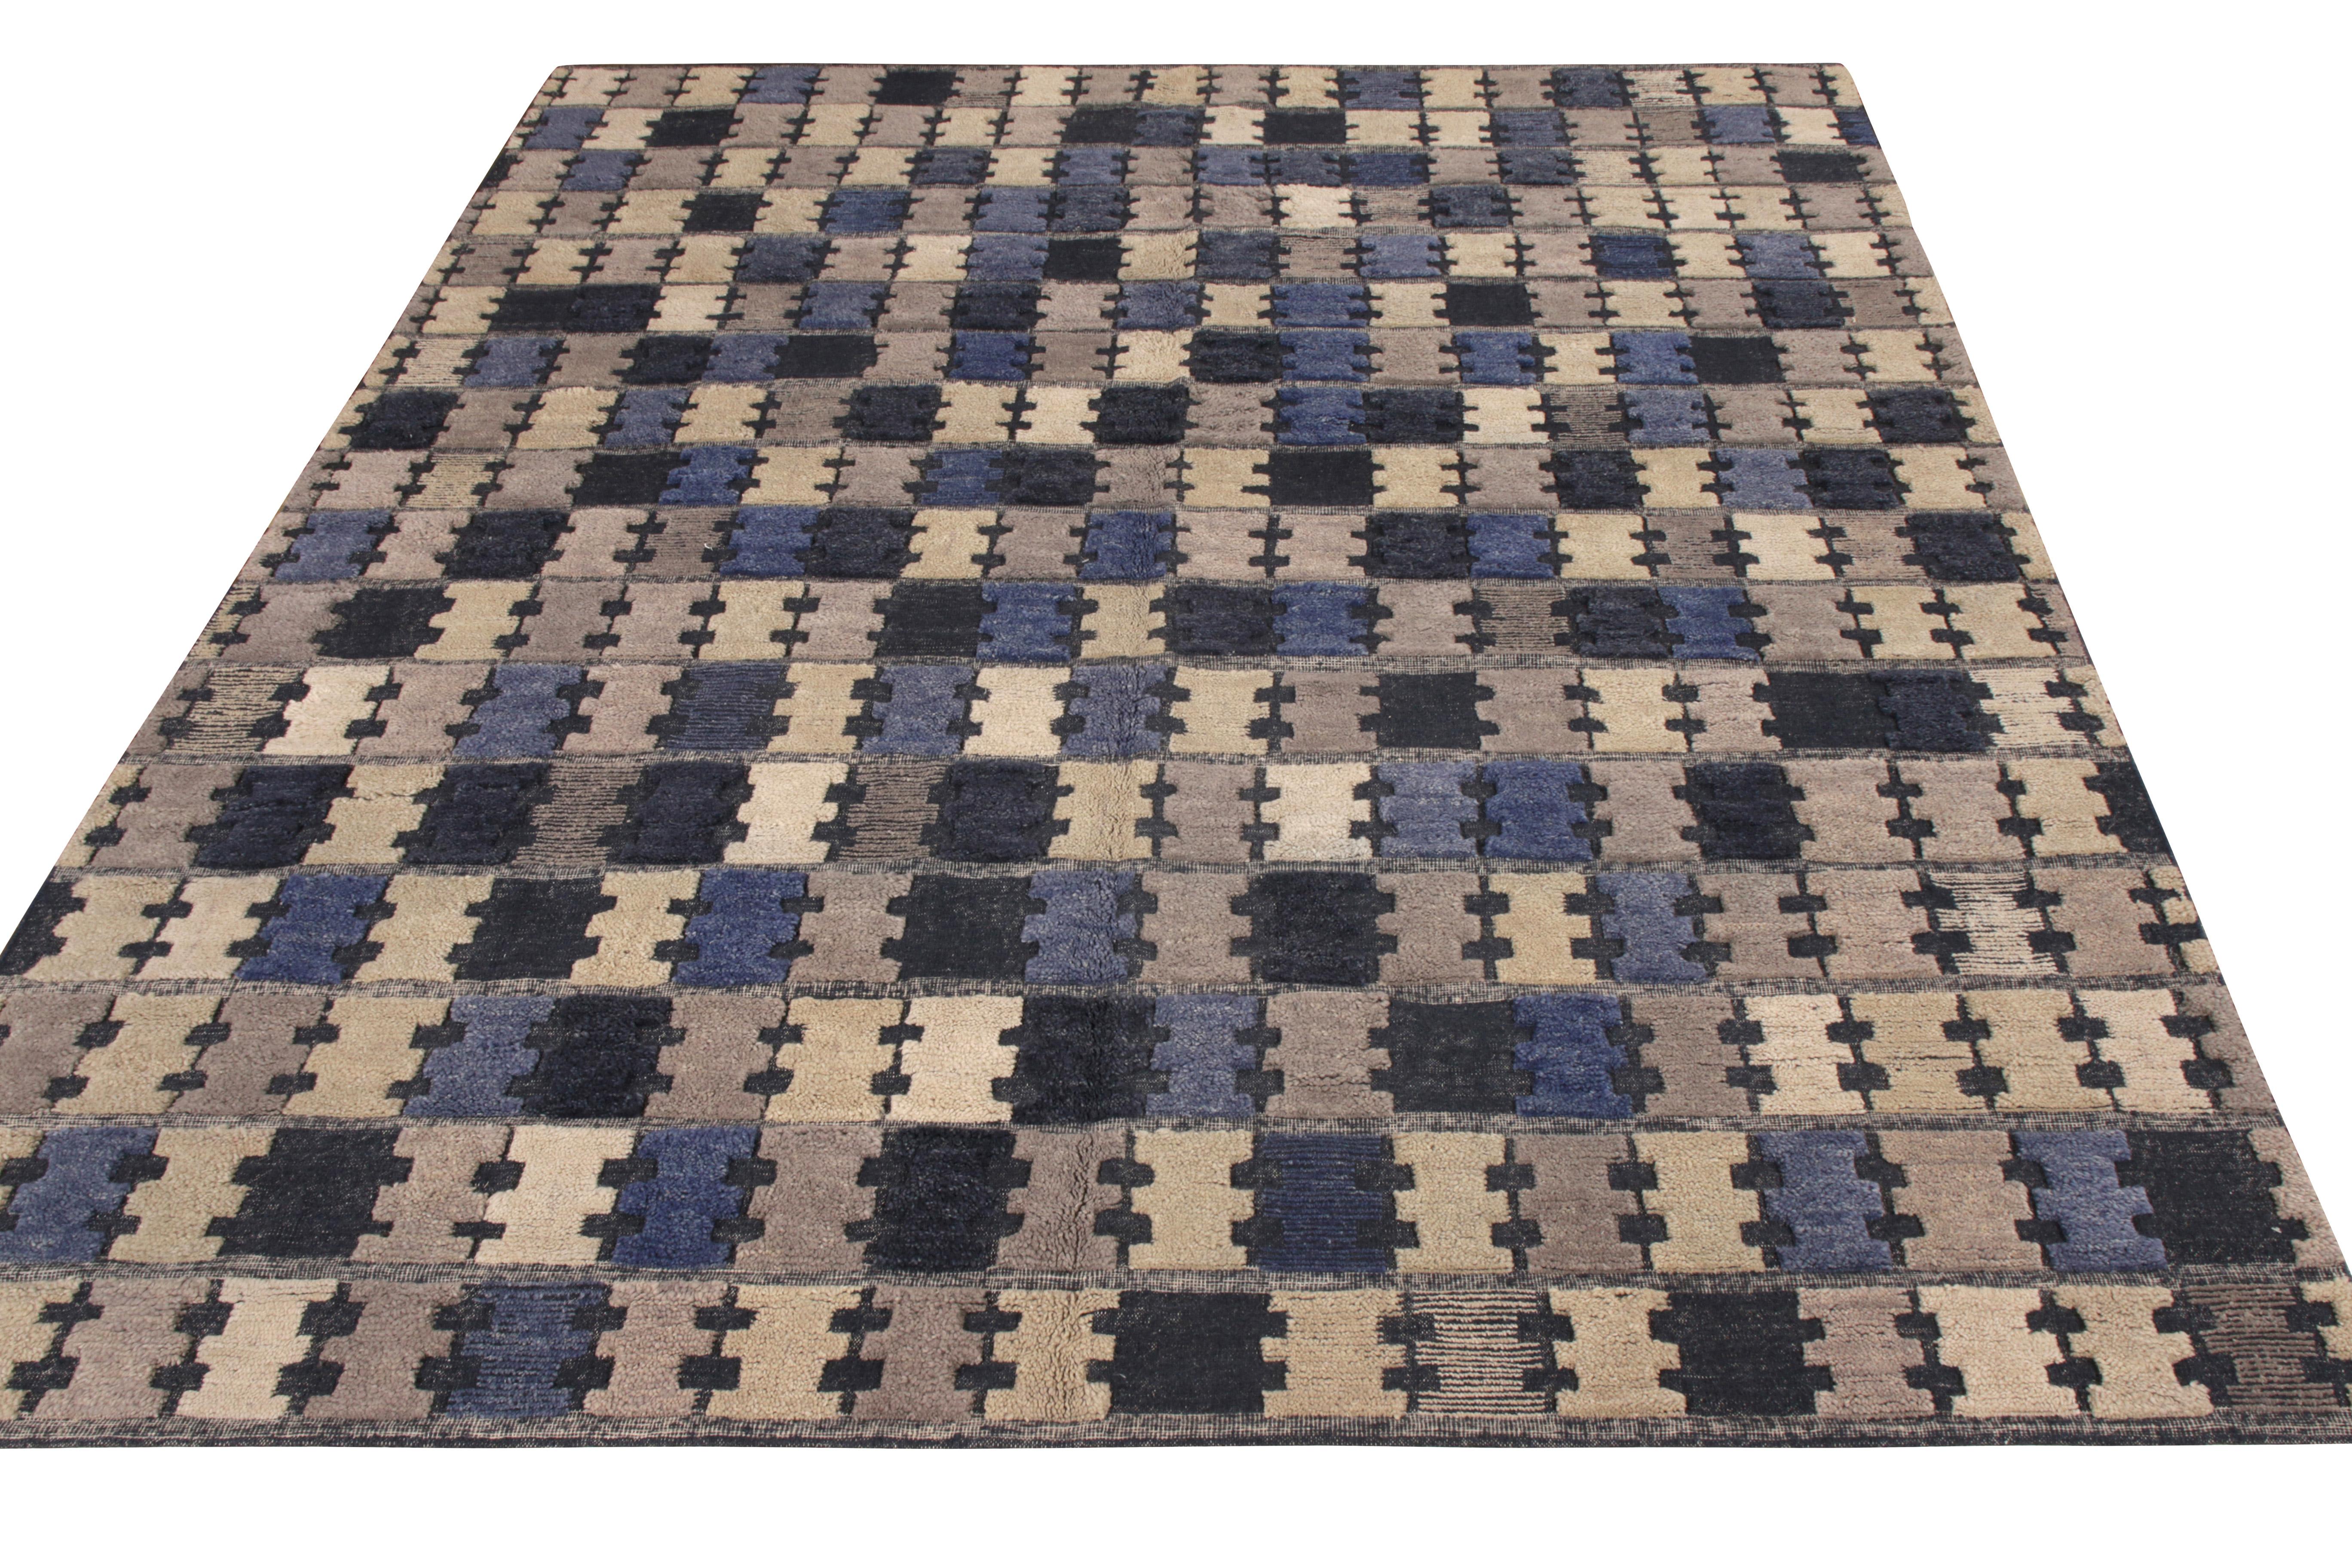 Inviting and rich in feel, this 9x11 rug is an alluring addition to Rug & Kilim’s Scandinavian Collection. The rug relishes a clean abrashed look from its high low pile that transitions across the scale in a refined geometric pattern. The thoughtful